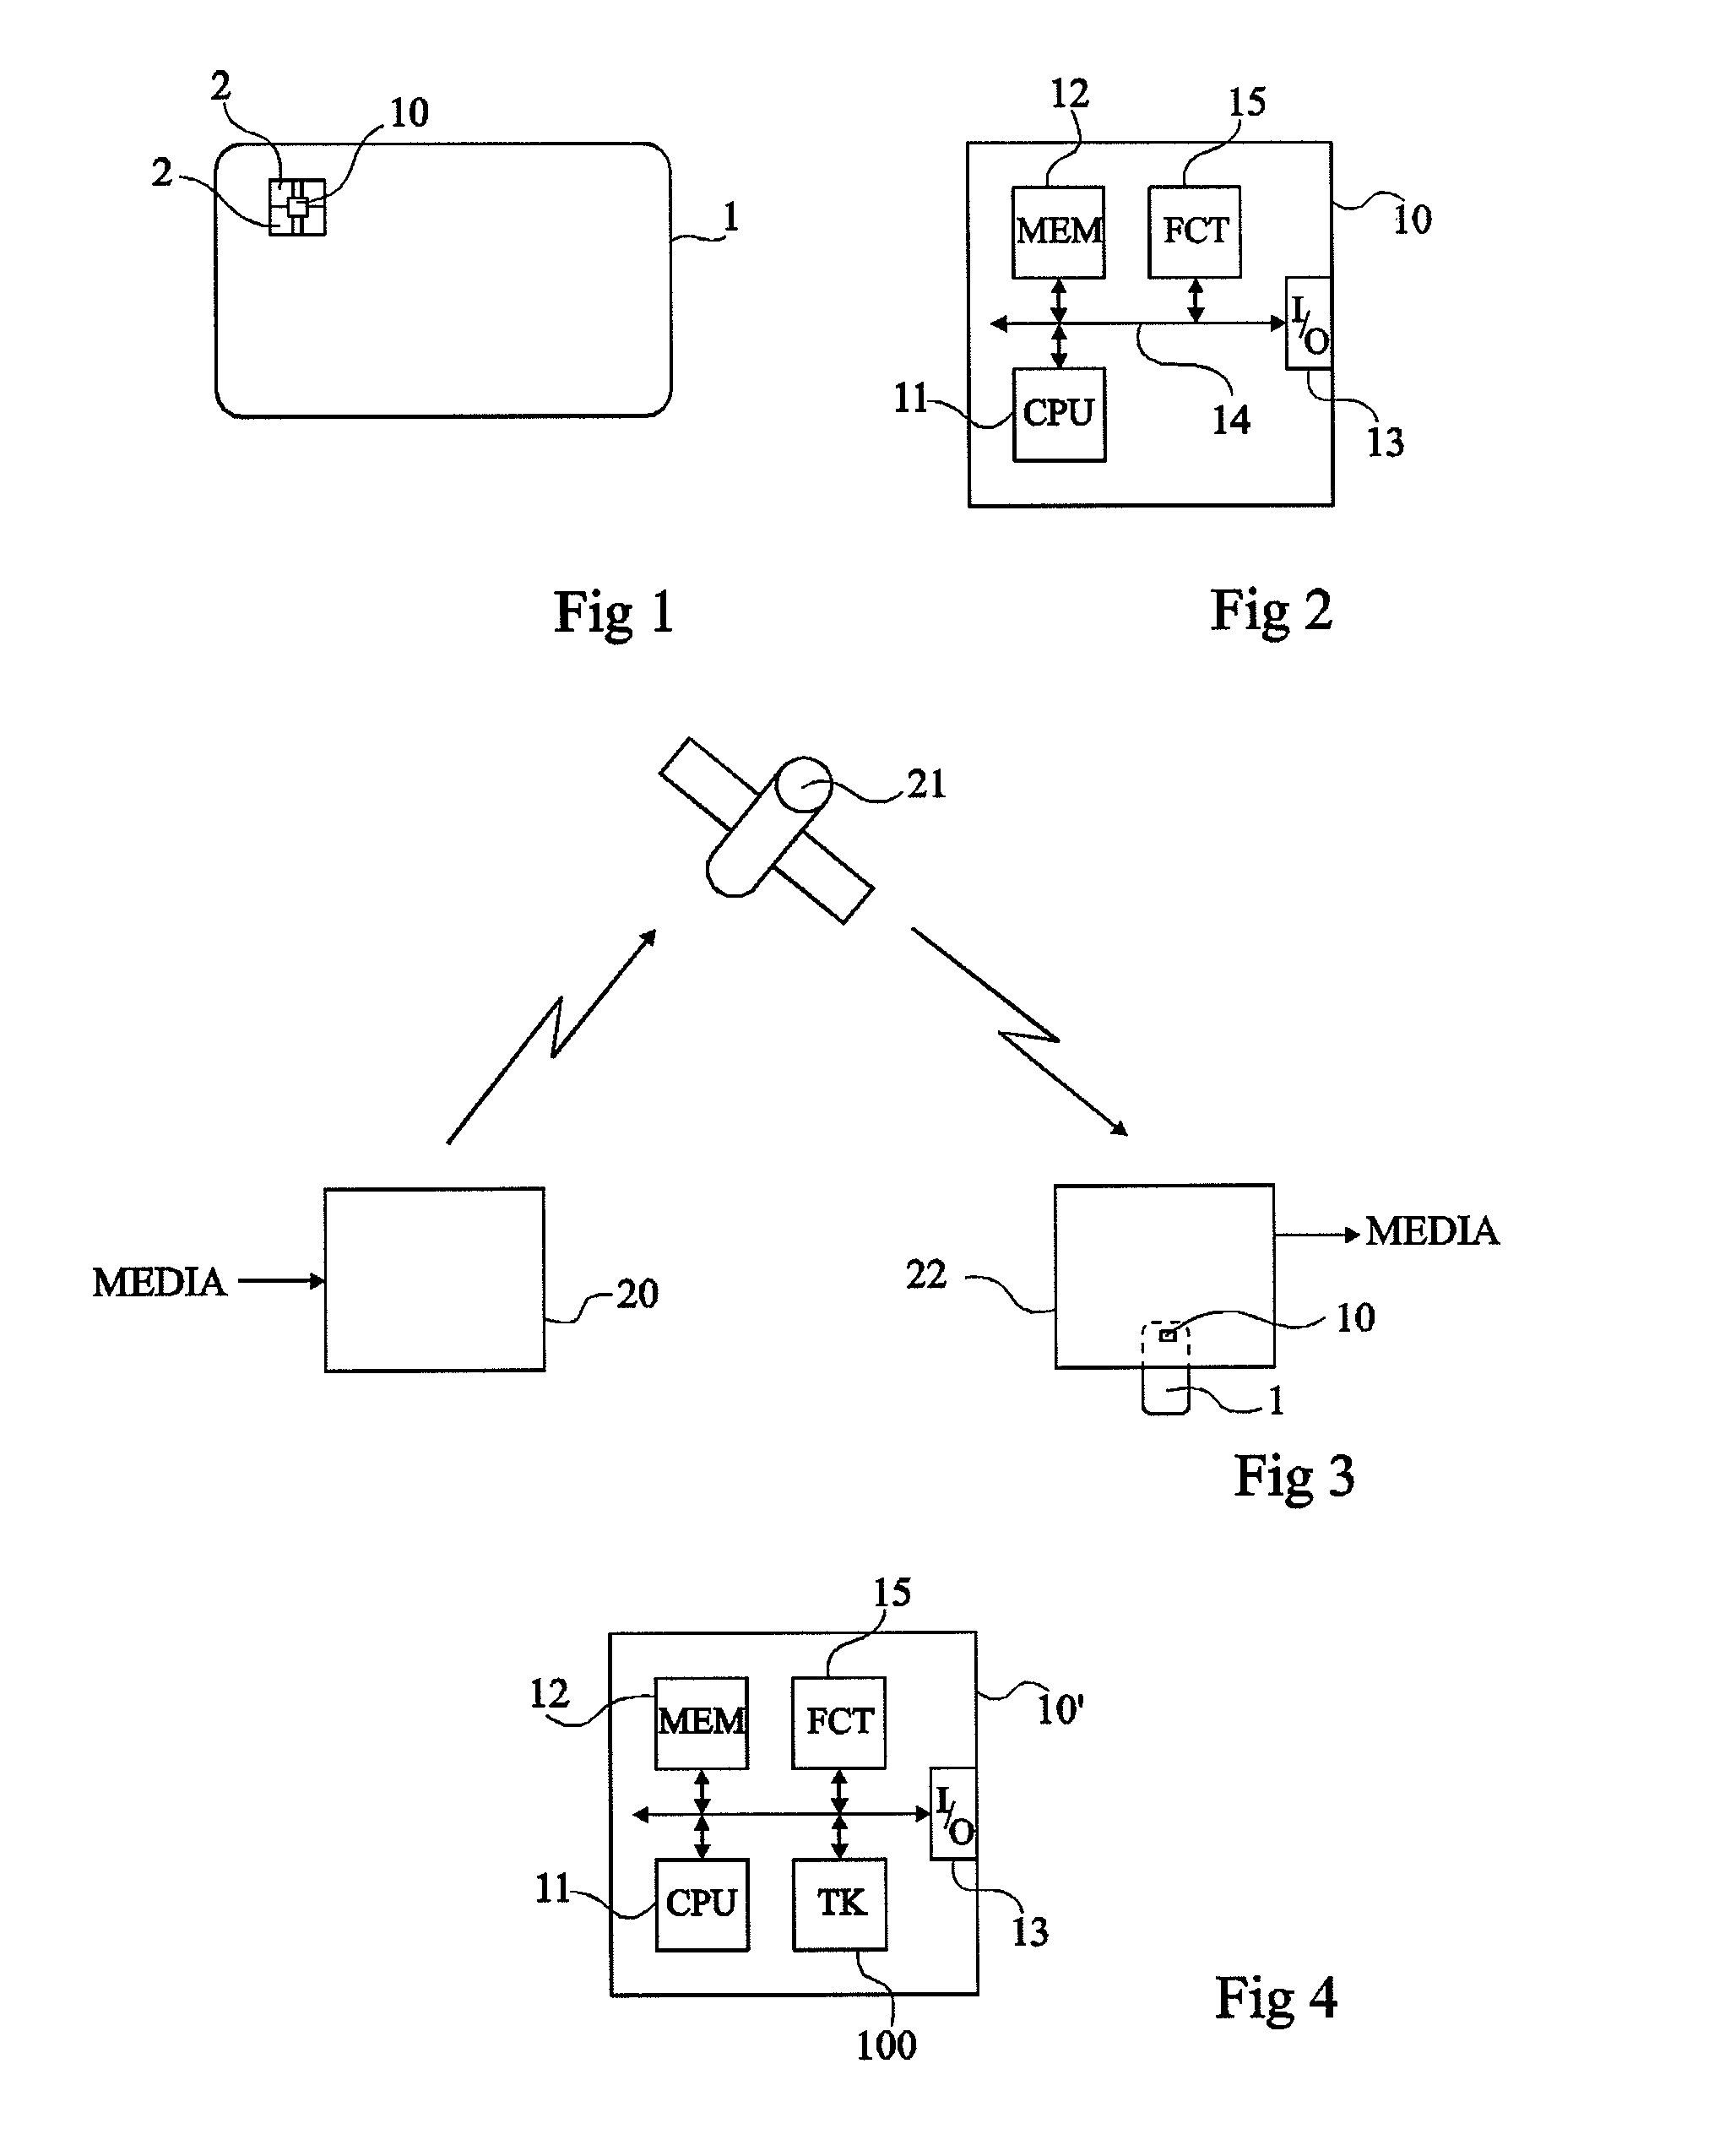 Limitation of the access to a resource of an electronic circuit